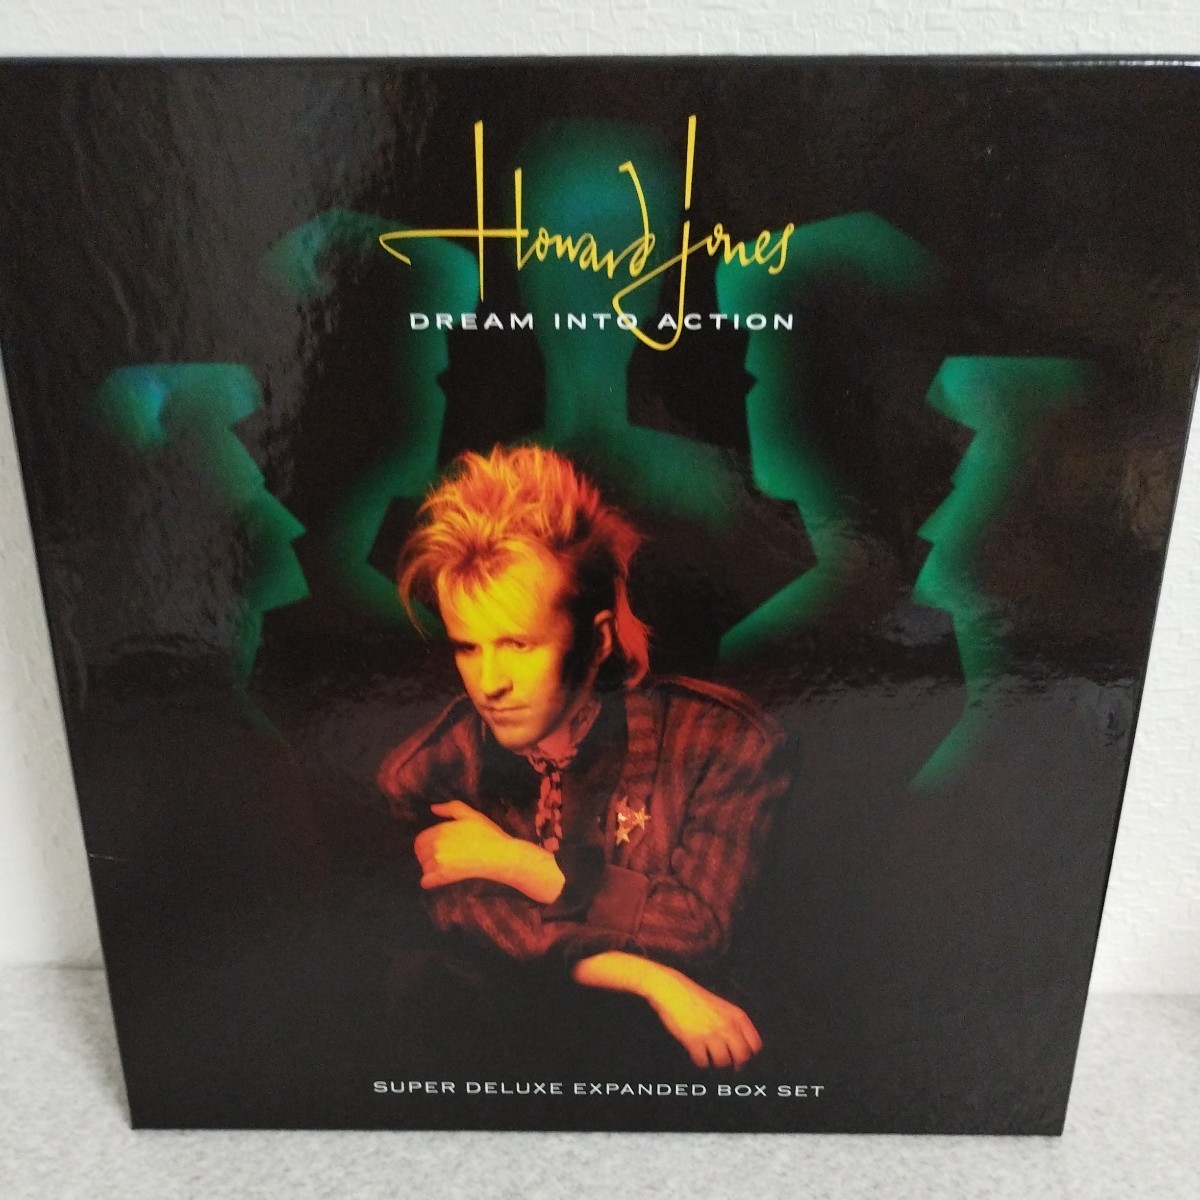  secondhand goods * Howard * Jones DREAM INTO ACTION SUPER DELUXE EXPENDED BOX SET